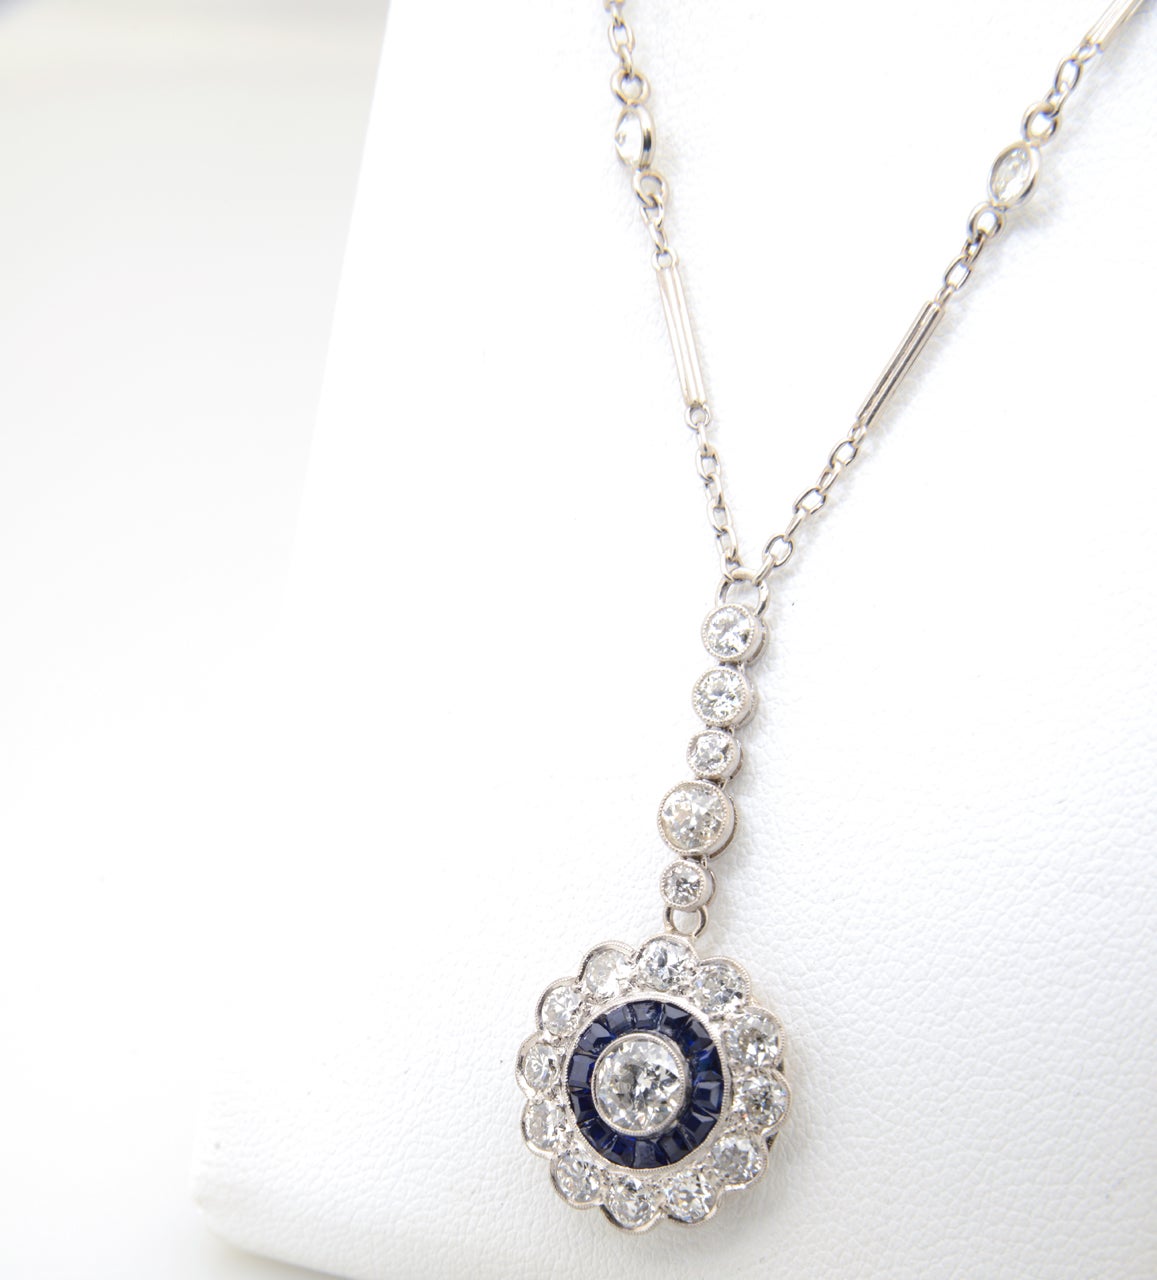 Finely made Art Deco diamond flower with a channel set sapphire ring around a .50 carat European cut diamond (approximate weight). The diamonds in the petals and drop are approximately another 1.5 carats.   The pendant measures  1 1/2